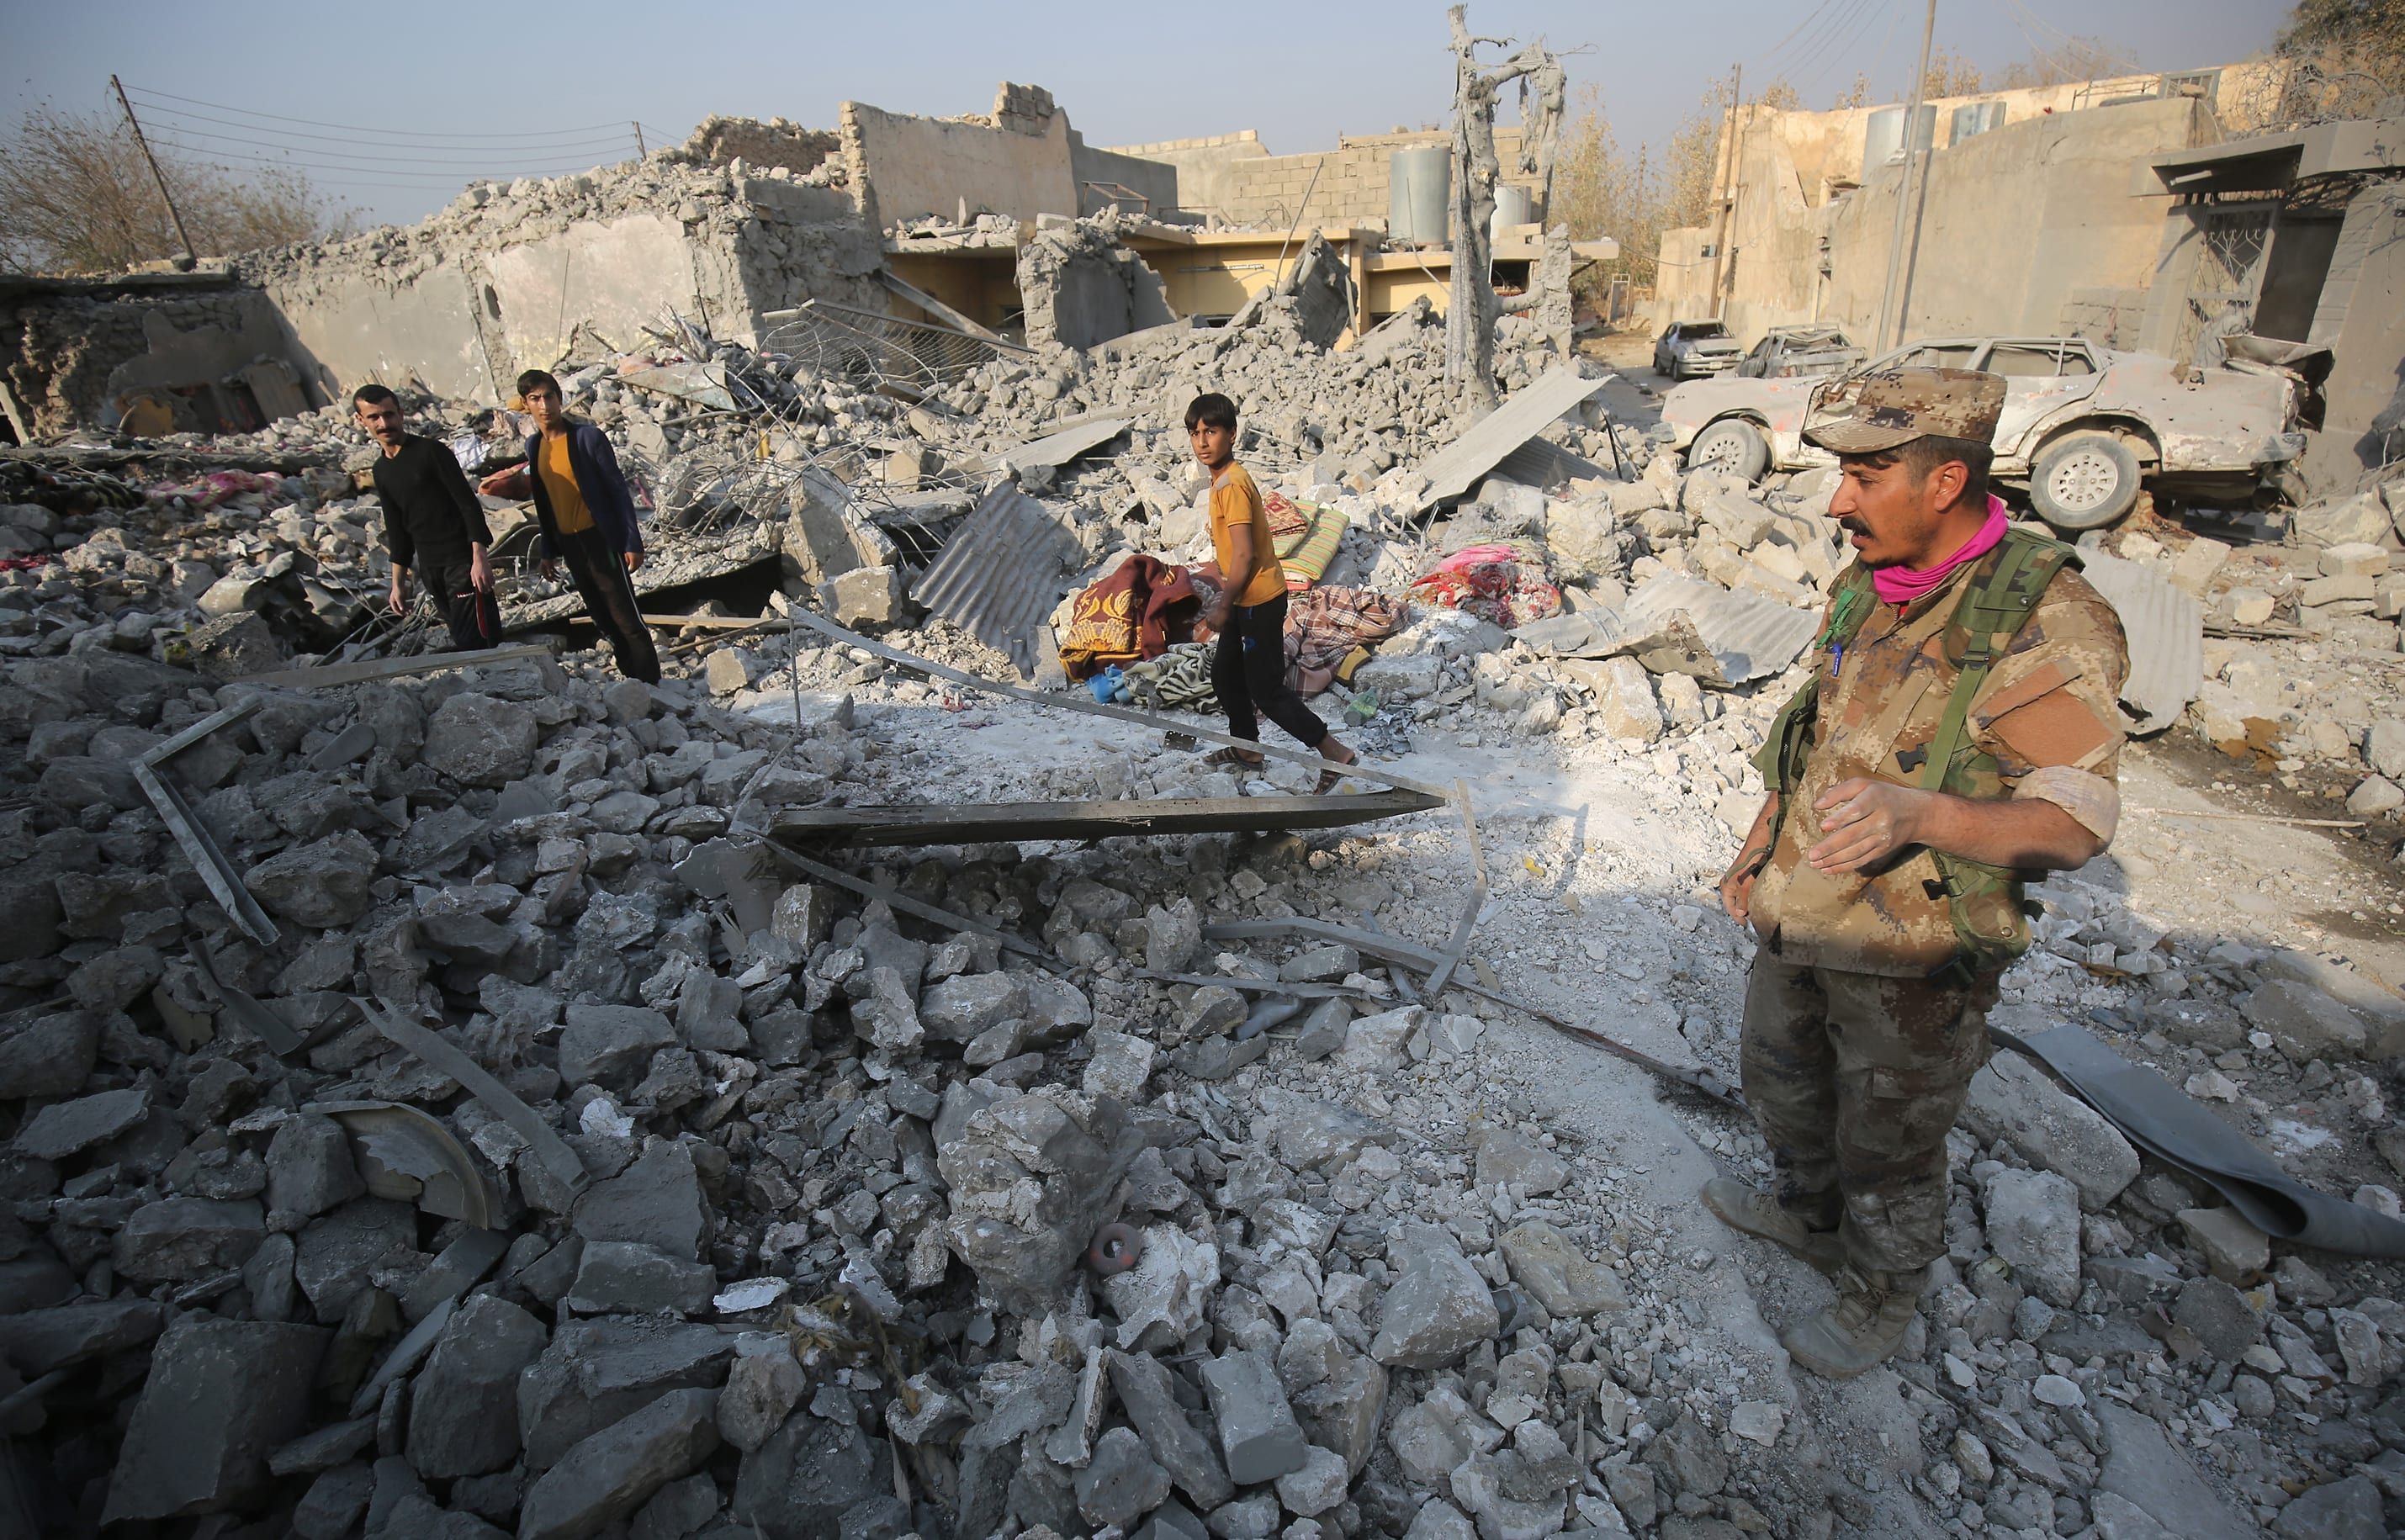 Hammam al_Alil residents inspect the damage caused by air strikes in their town, south of Mosul.